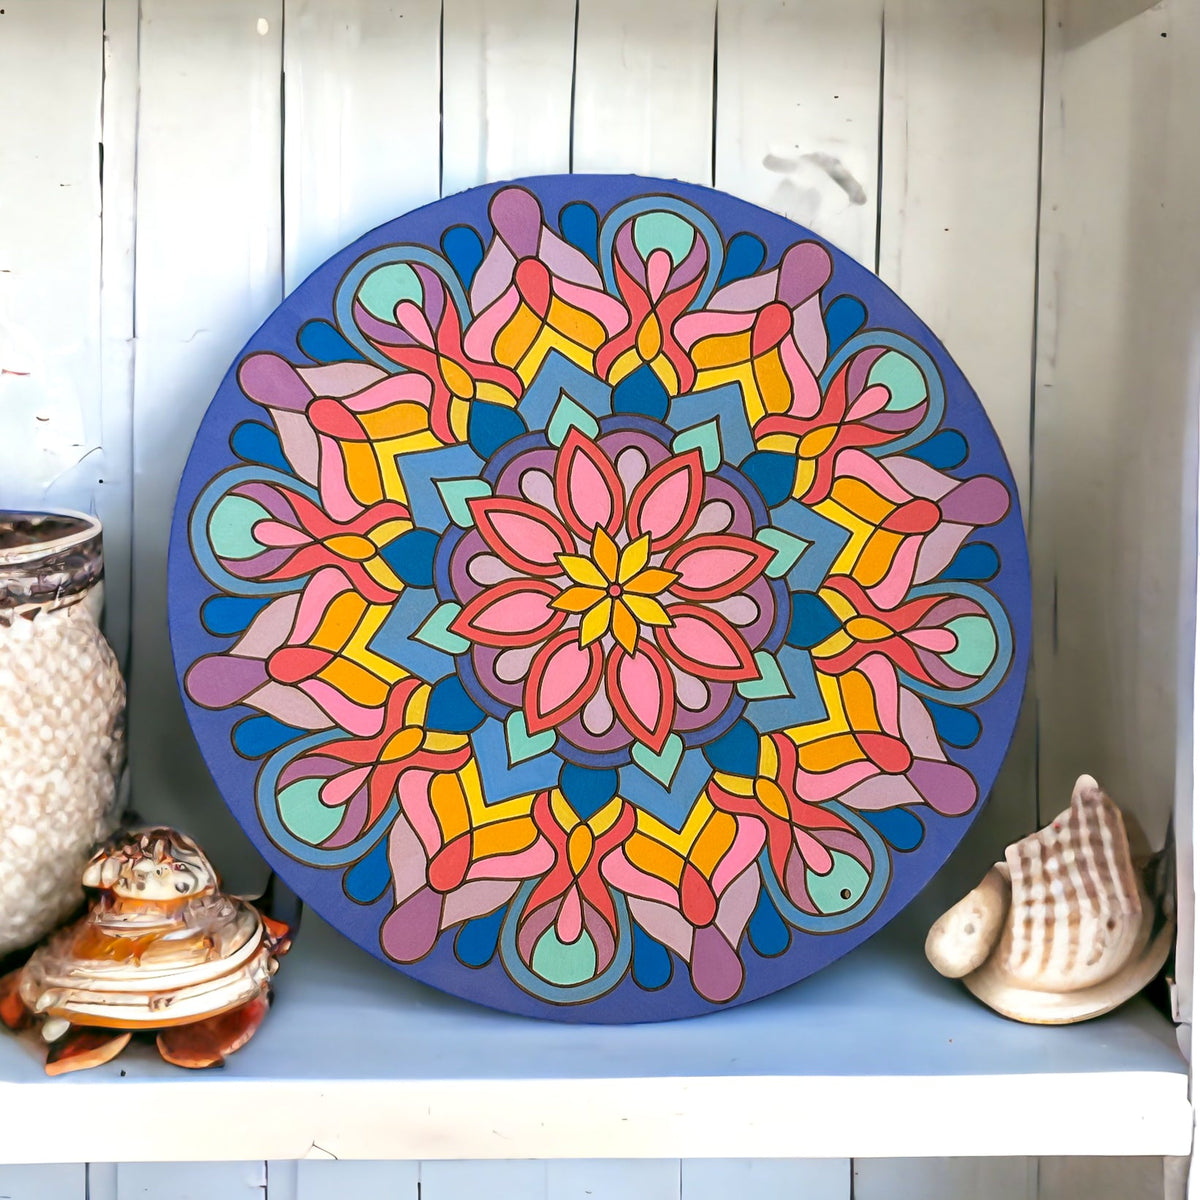 Life of Colour Mandala Painting Kit - The Dancer (Wildflowers)